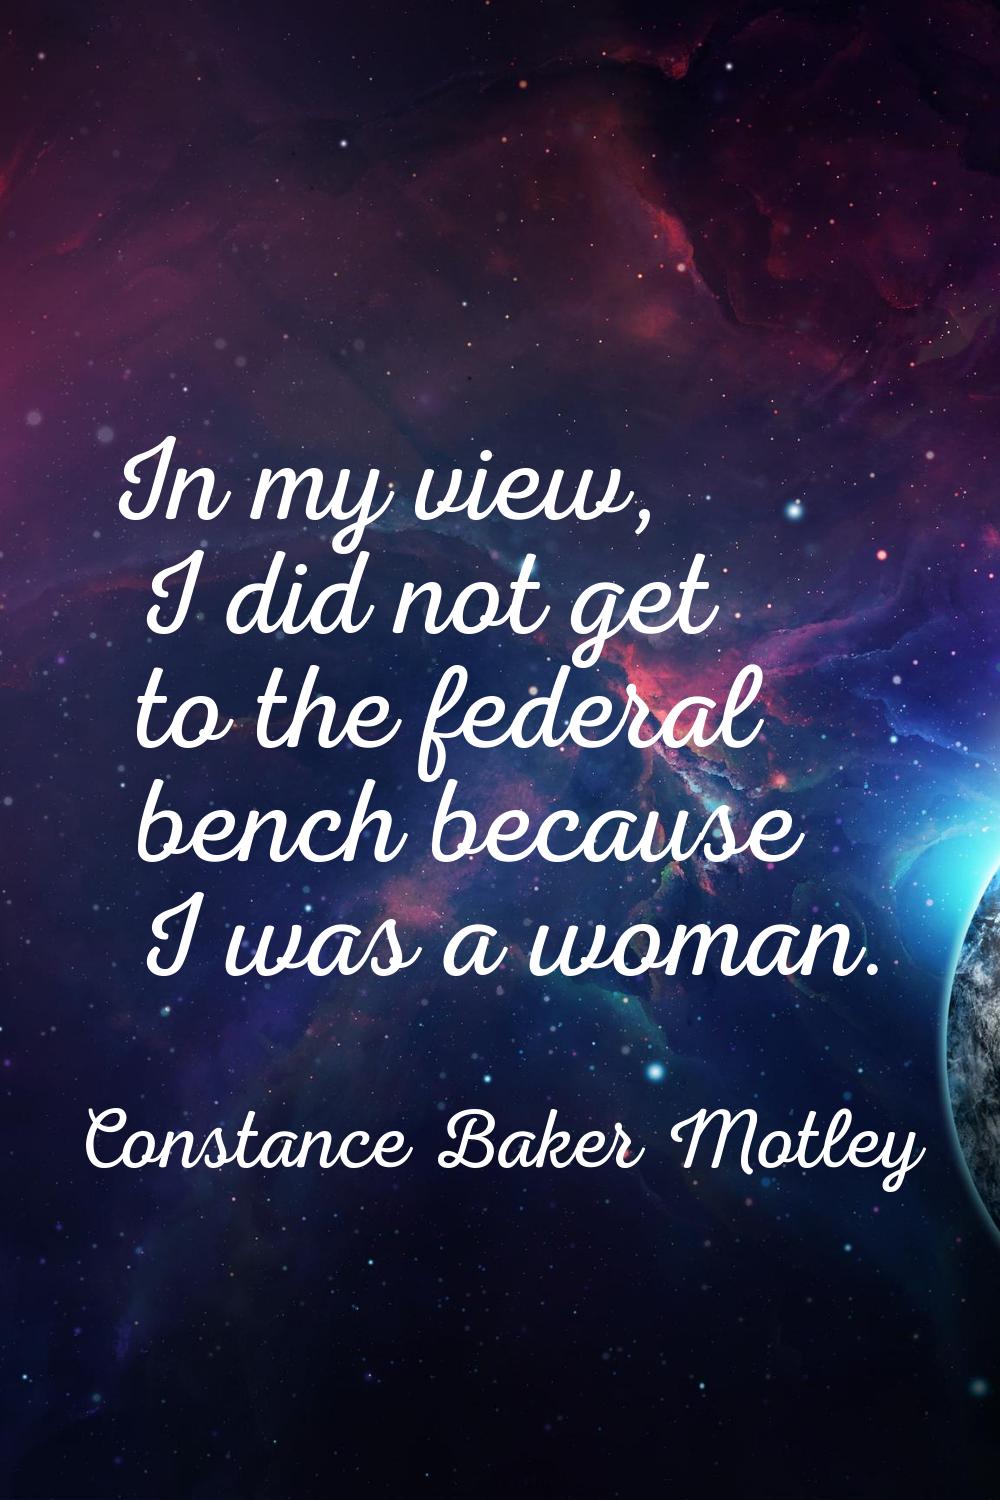 In my view, I did not get to the federal bench because I was a woman.